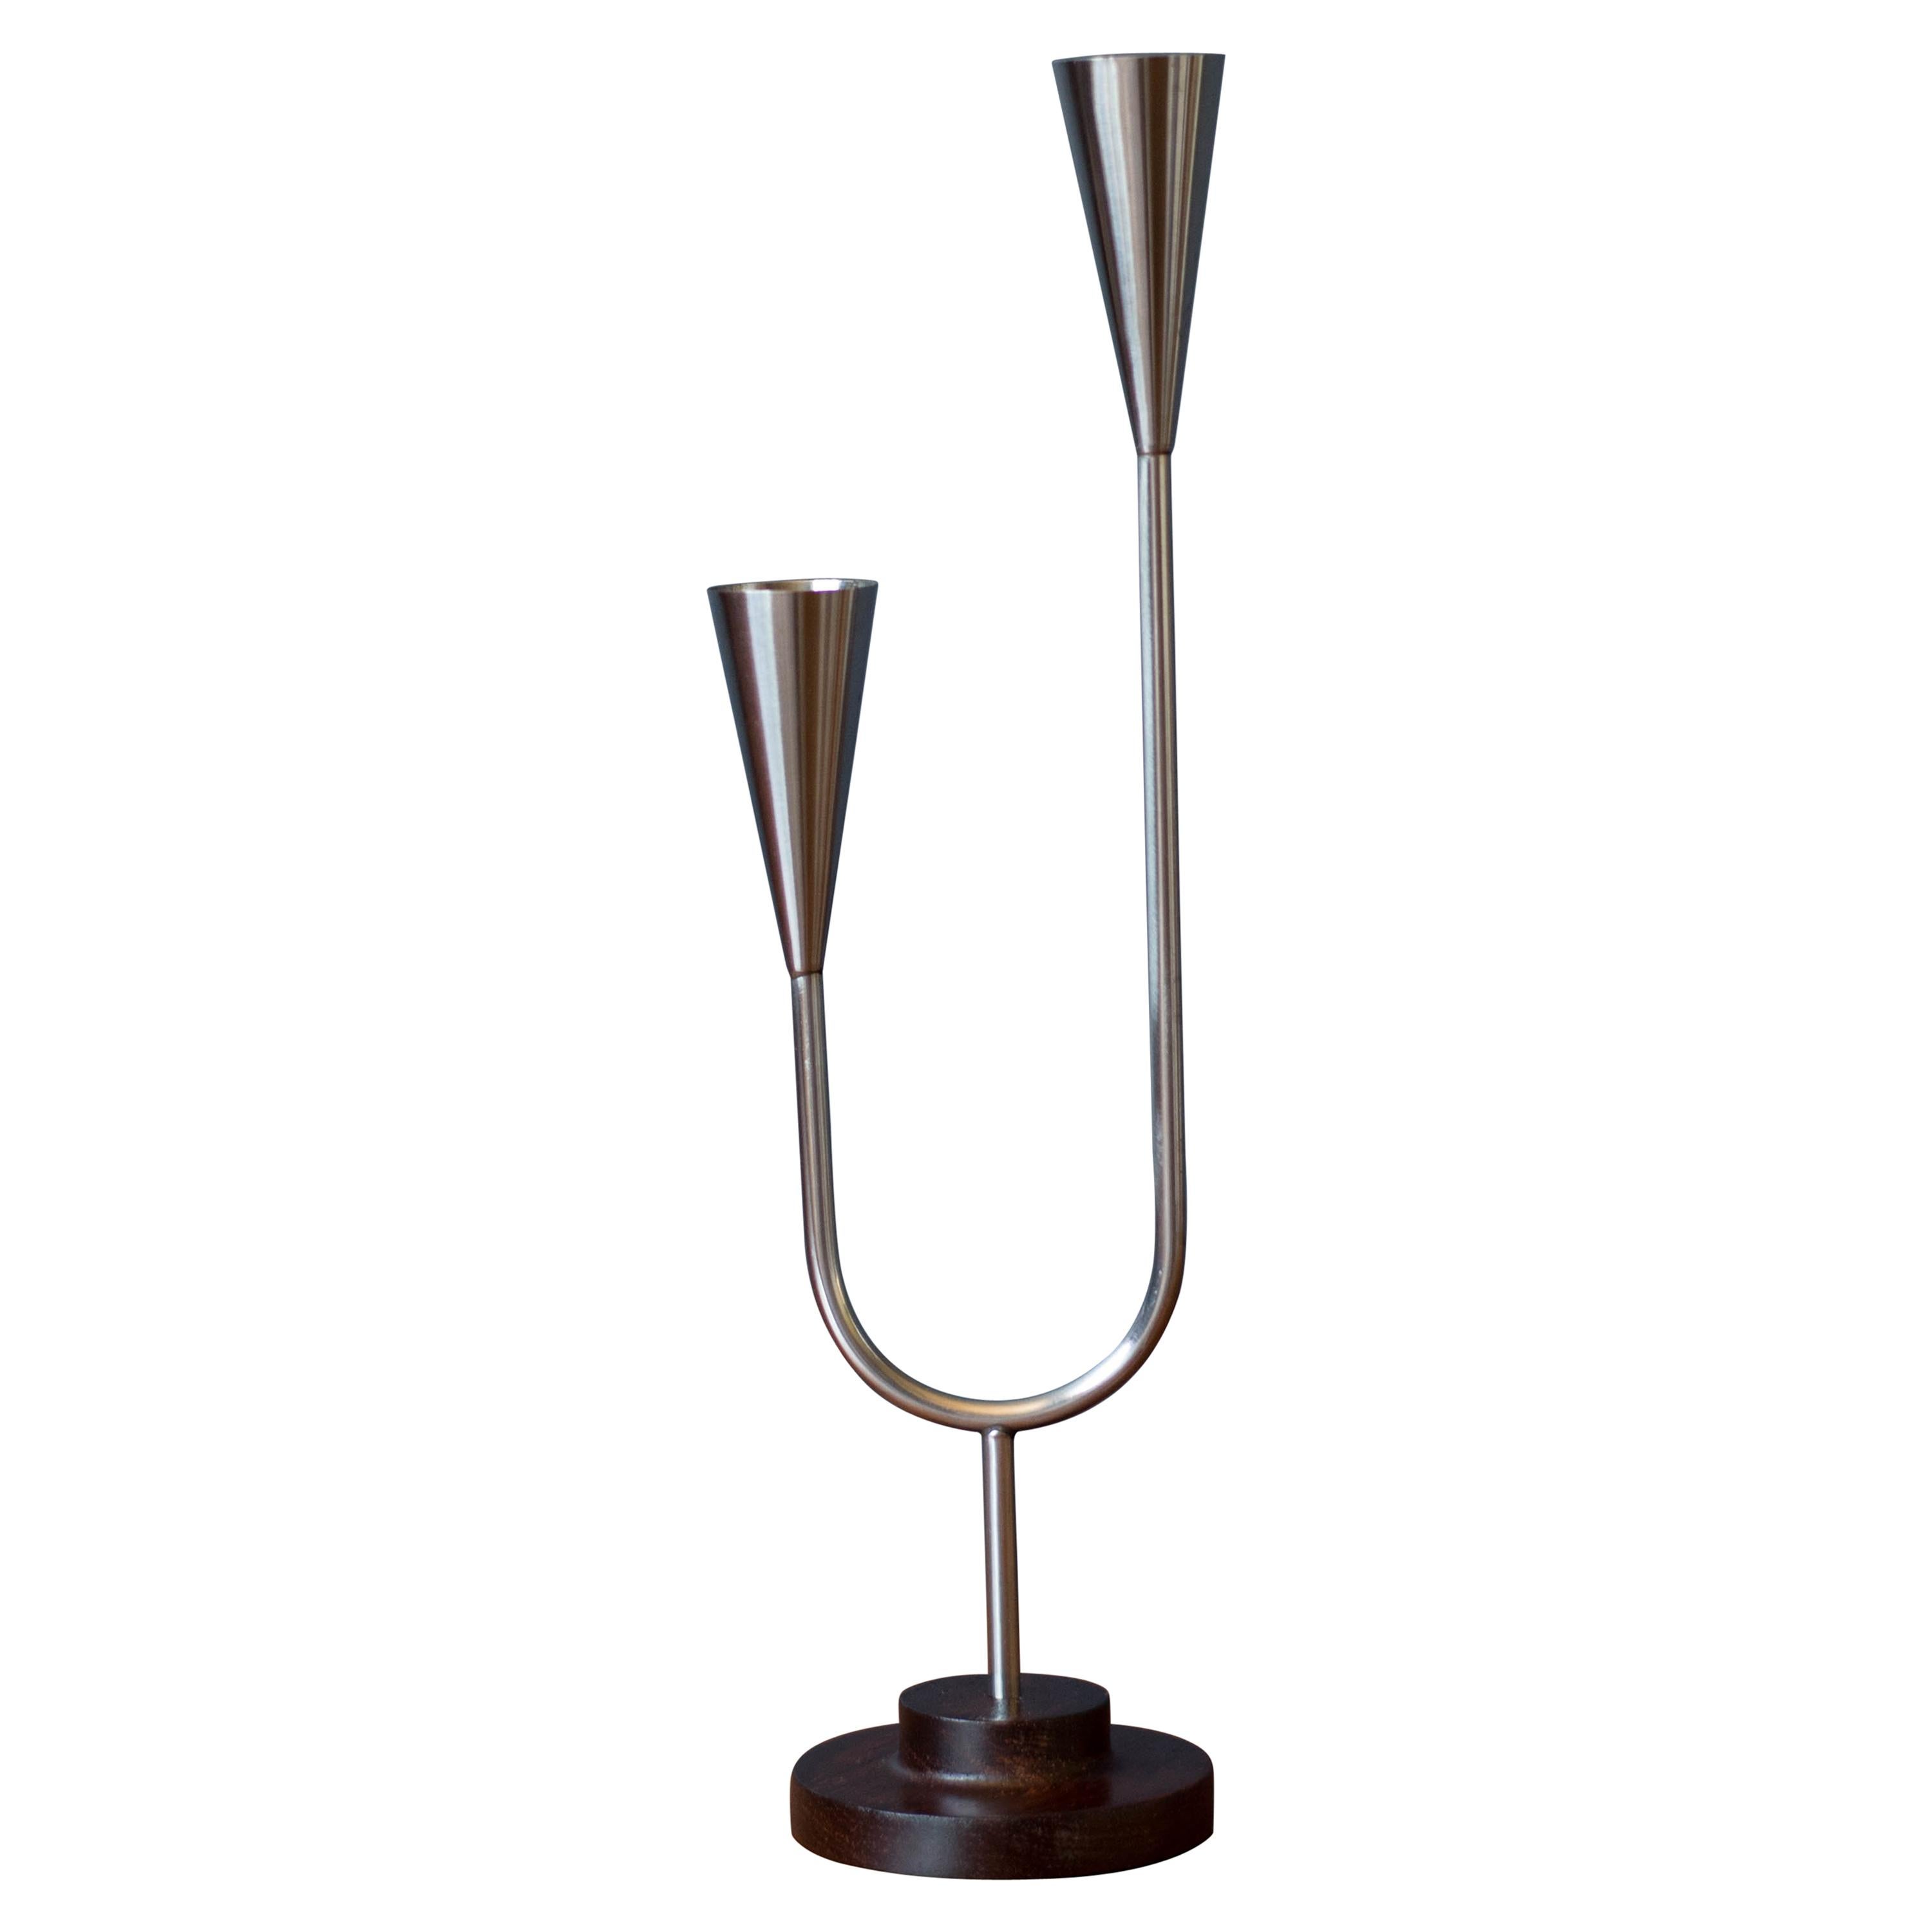 Danish Modern Lundtofte Rosewood and Stainless Steel Candle Holder For Sale